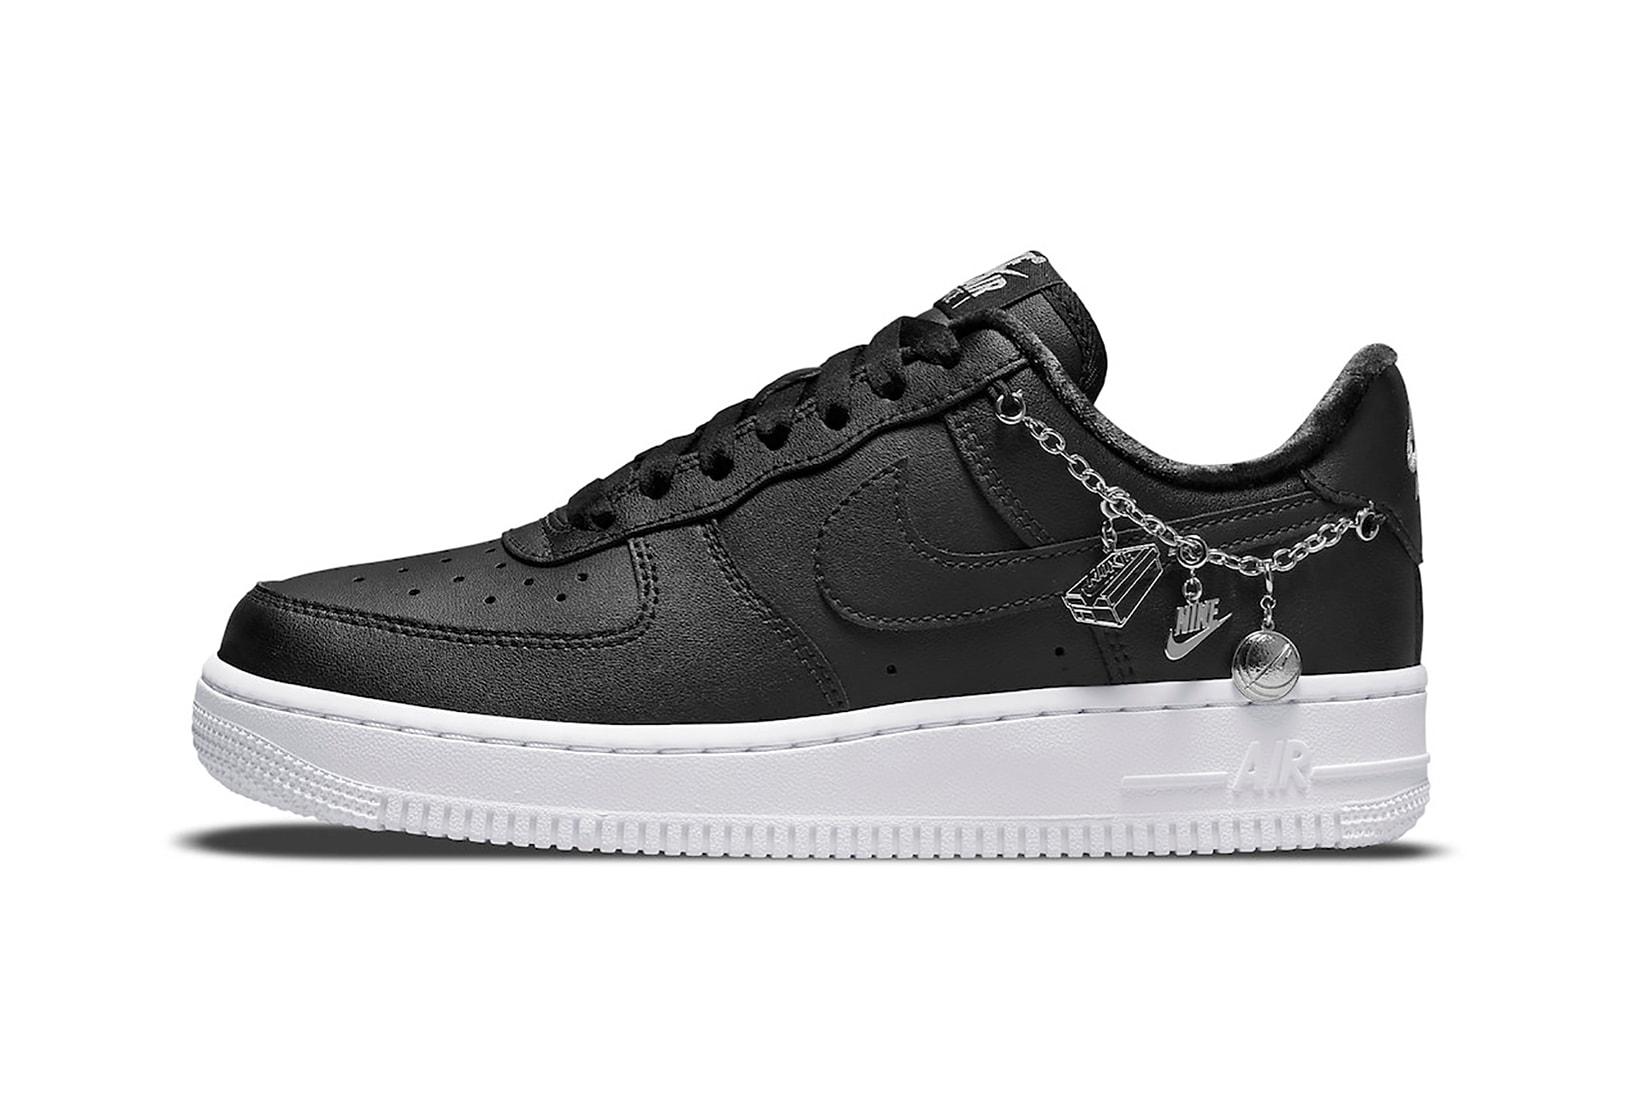 Nike Air Force 1 AF1 Low LX Lucky Charms Black Silver Footwear Kicks Sneakers Shoes